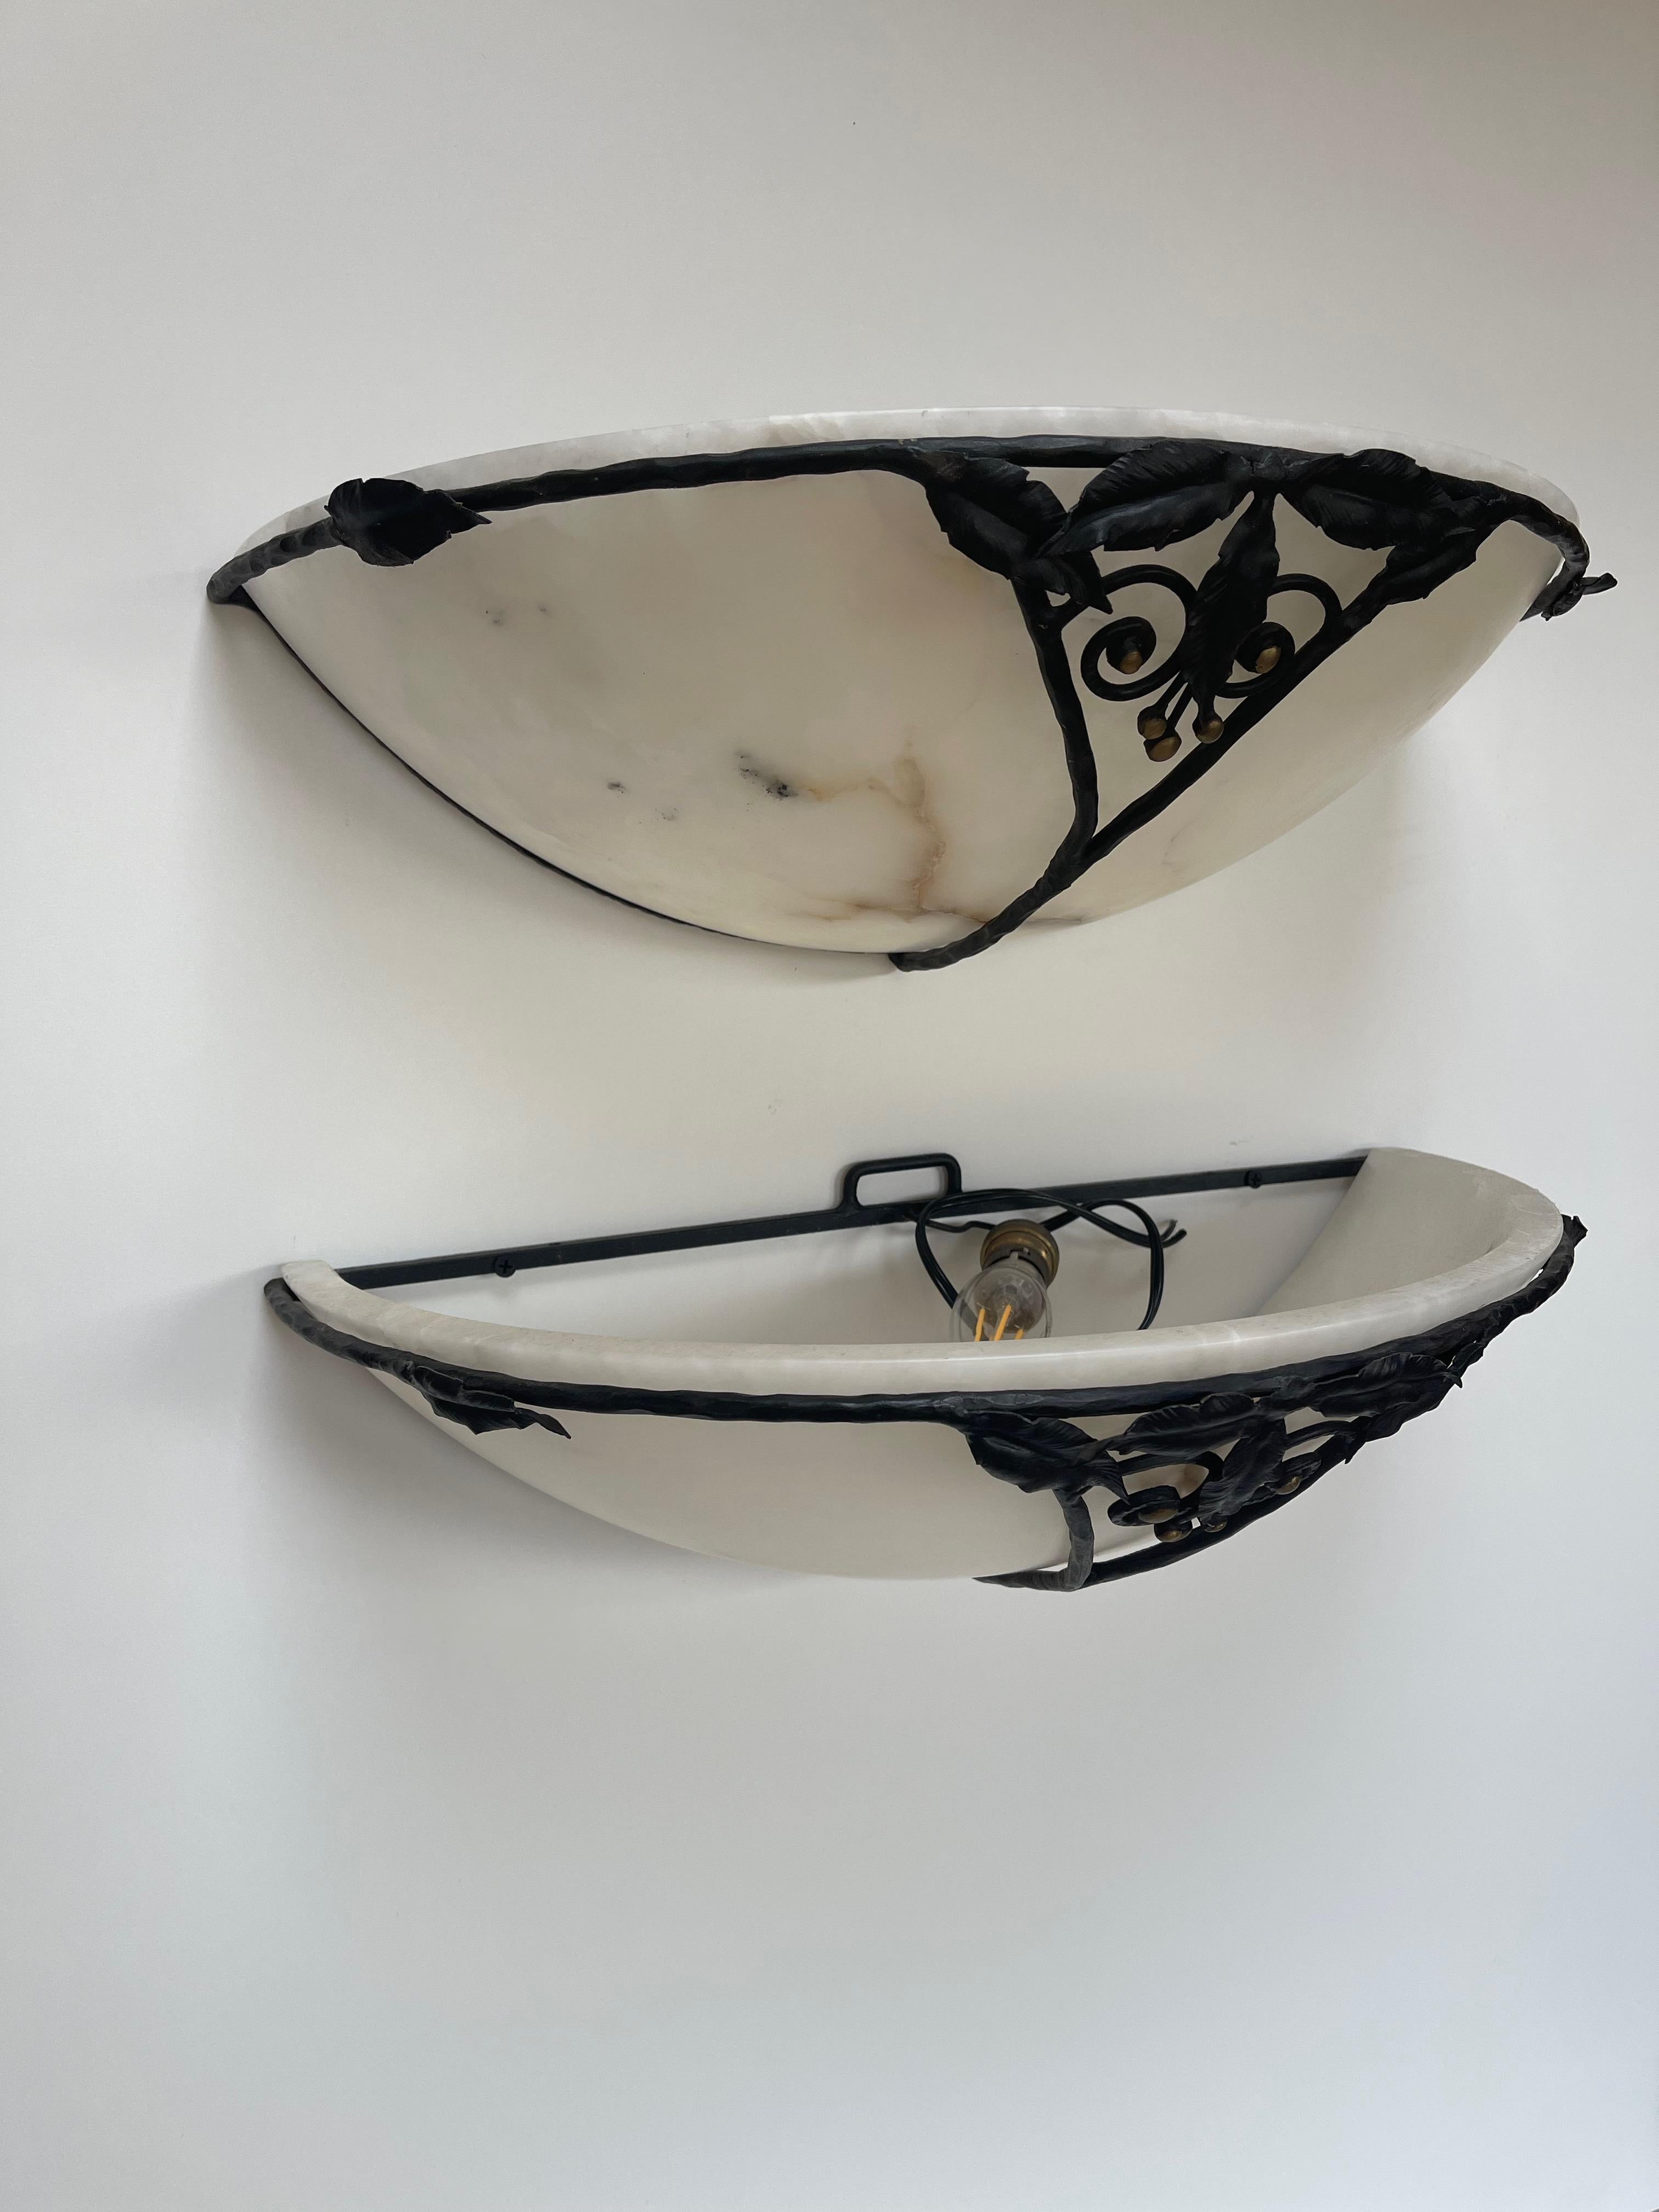 Pair of 1930 wall lights, large size.
Wrought iron frame decorated with leaves.
Alabaster cup.
In very good condition and electrified.
Measures: width: 47cm
height: 13cm
depth: 24.5cm
Weight: 8 Kg